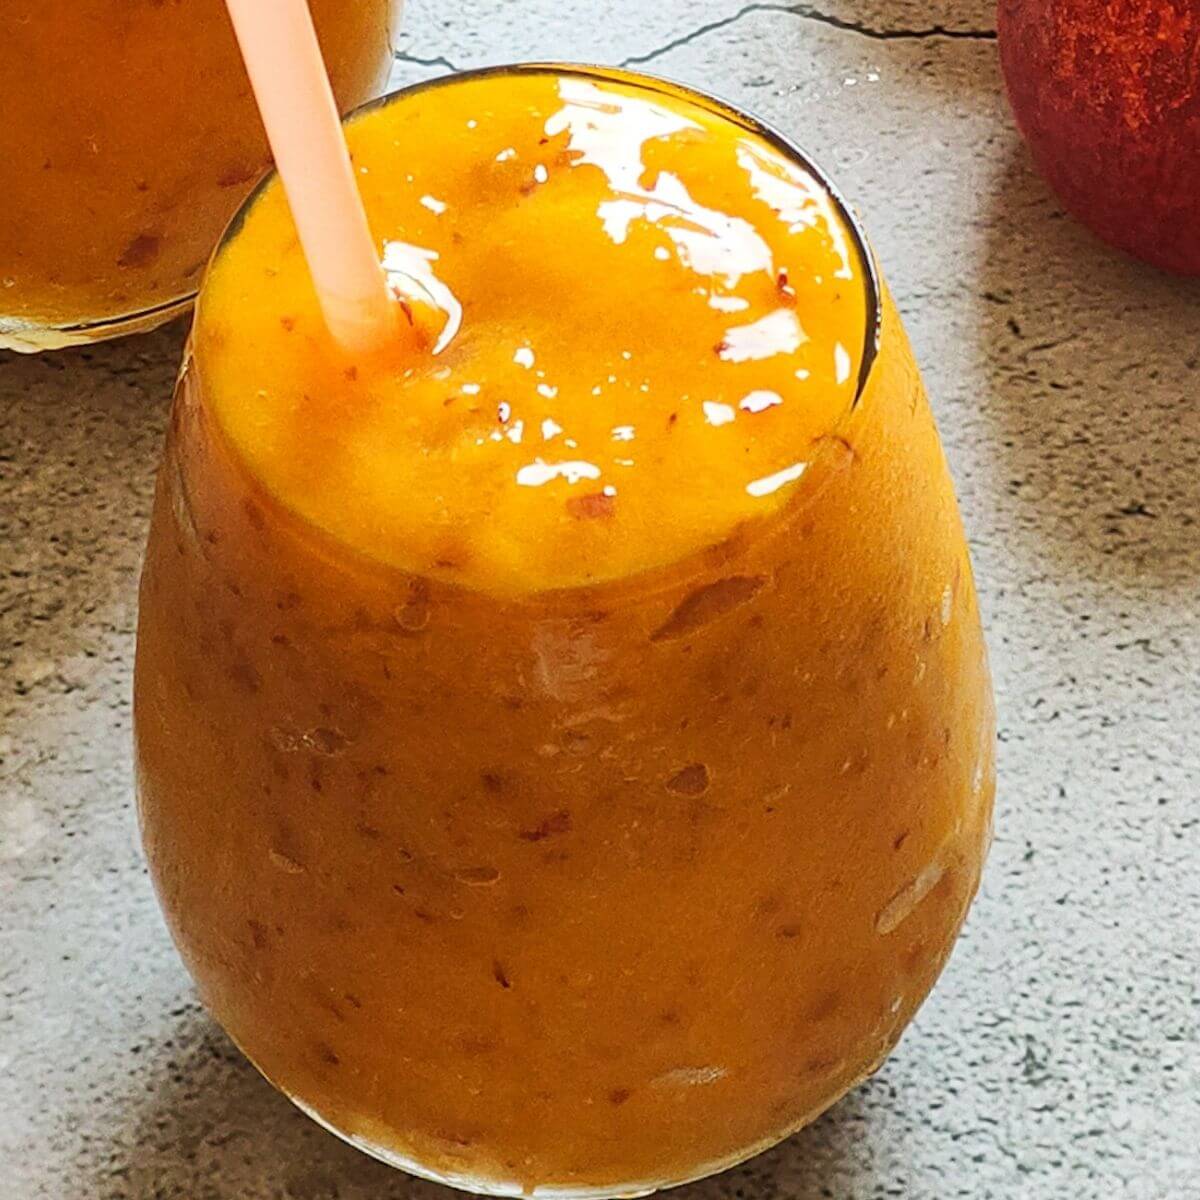 Peach Mango Smoothie - A 5 minutes recipe made with just 3 ingredients